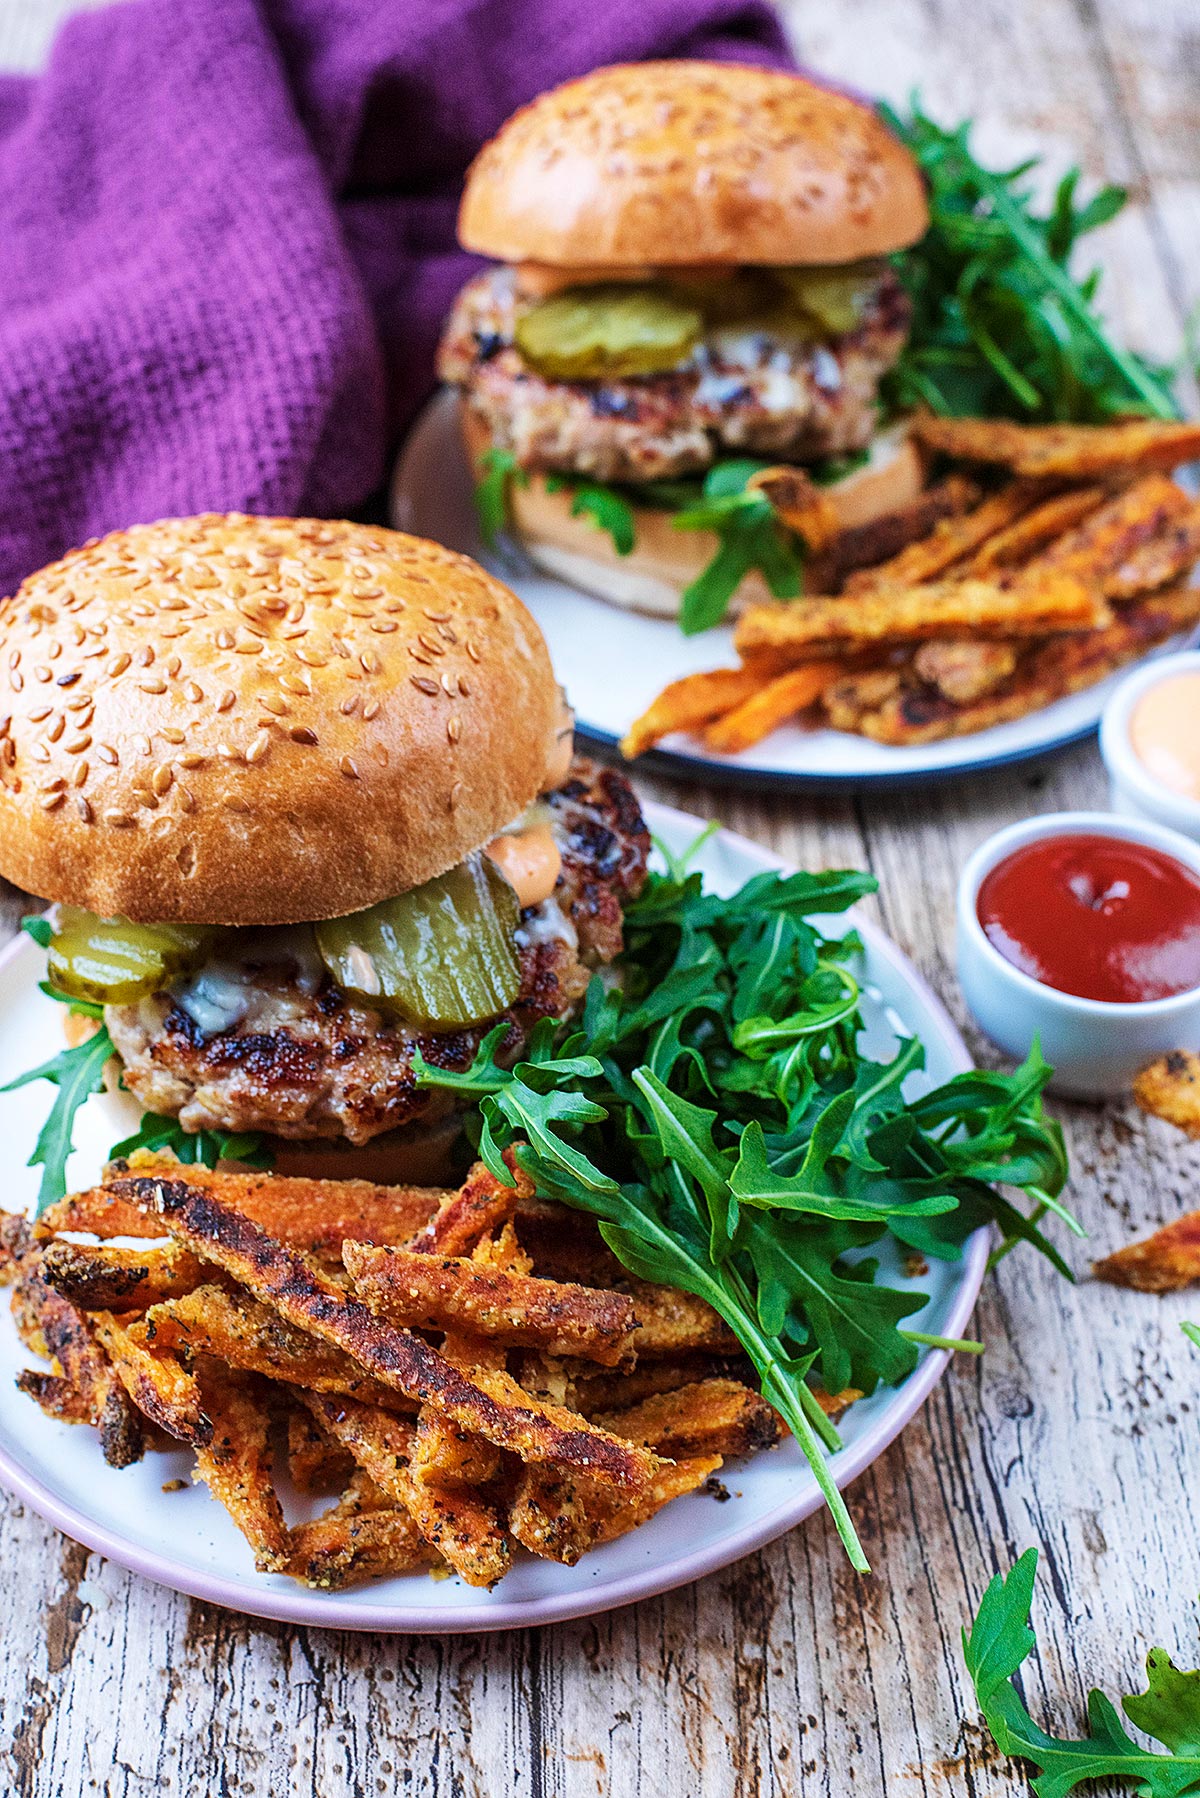 Two Pork and Apple Burgers with sweet potato fries and salad.